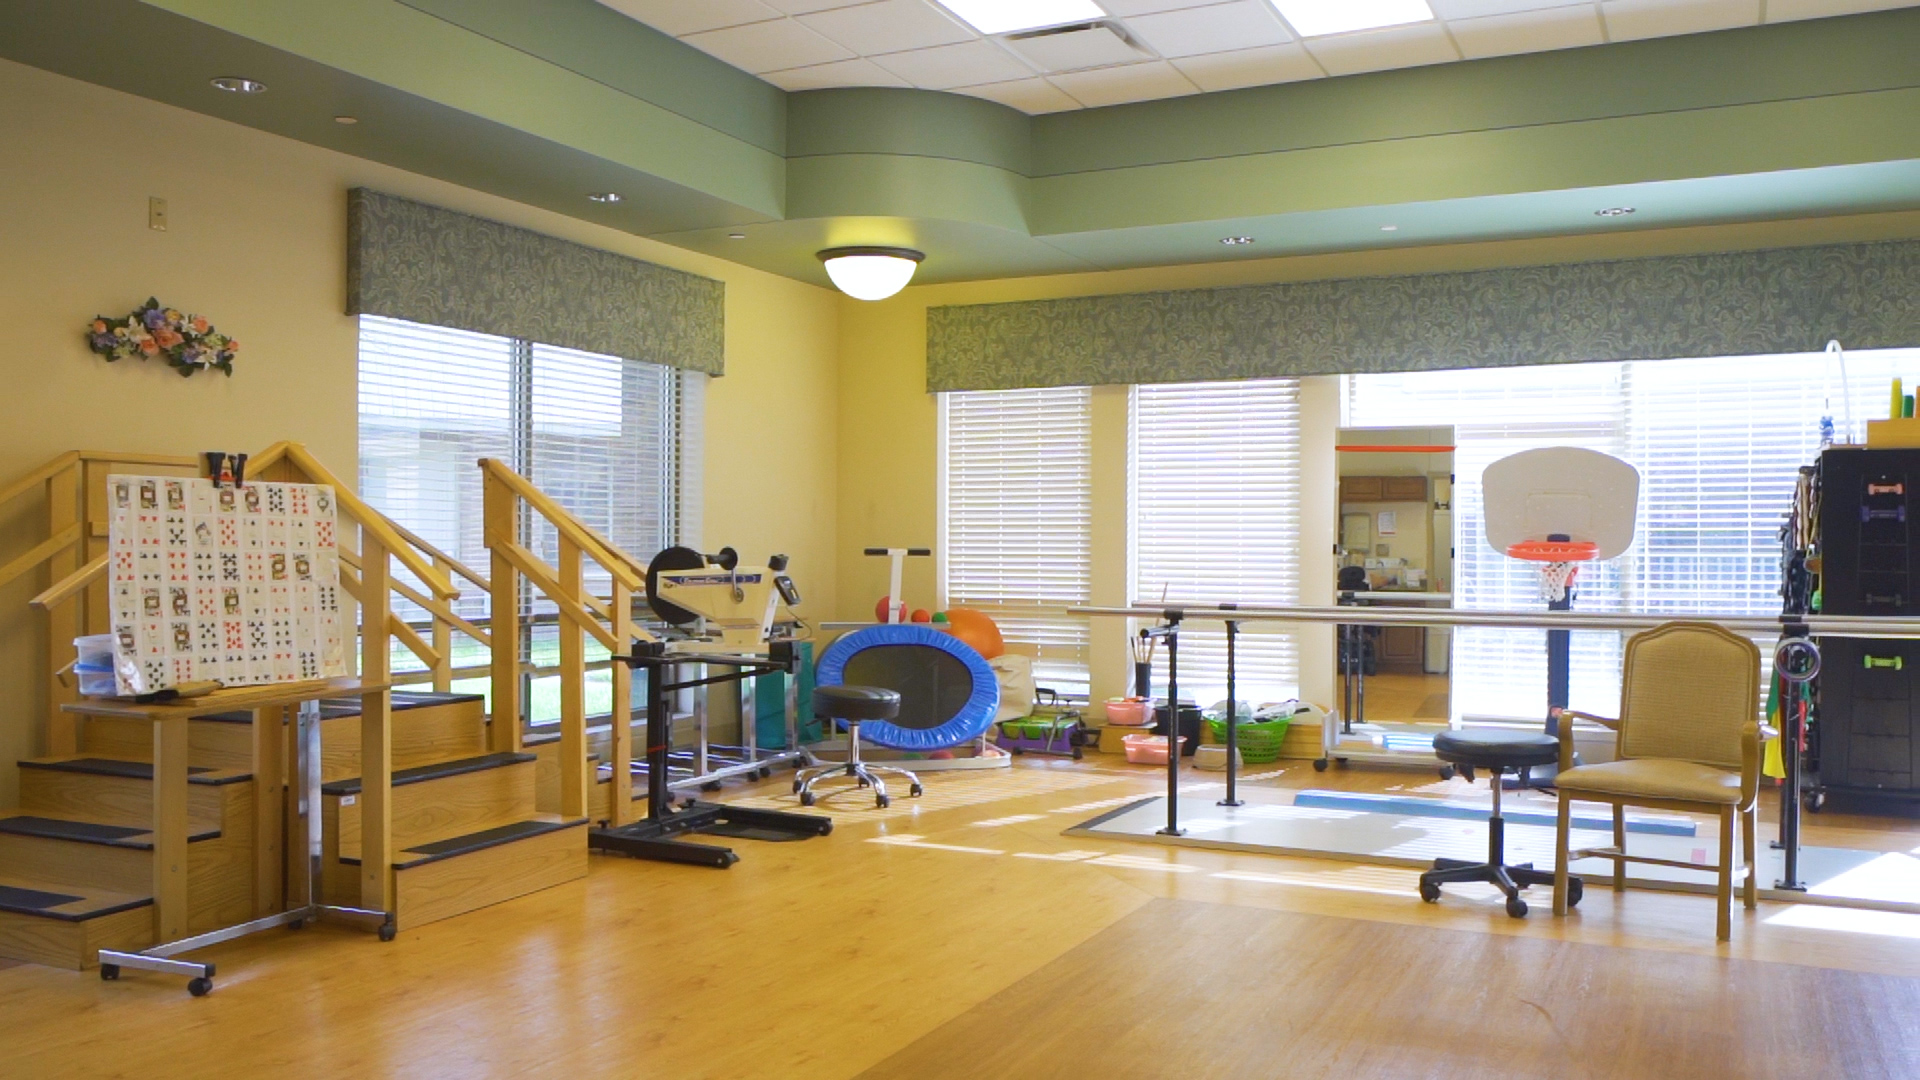 Wooden ladder, parallel bar and other therapy equipment inside the Gym.